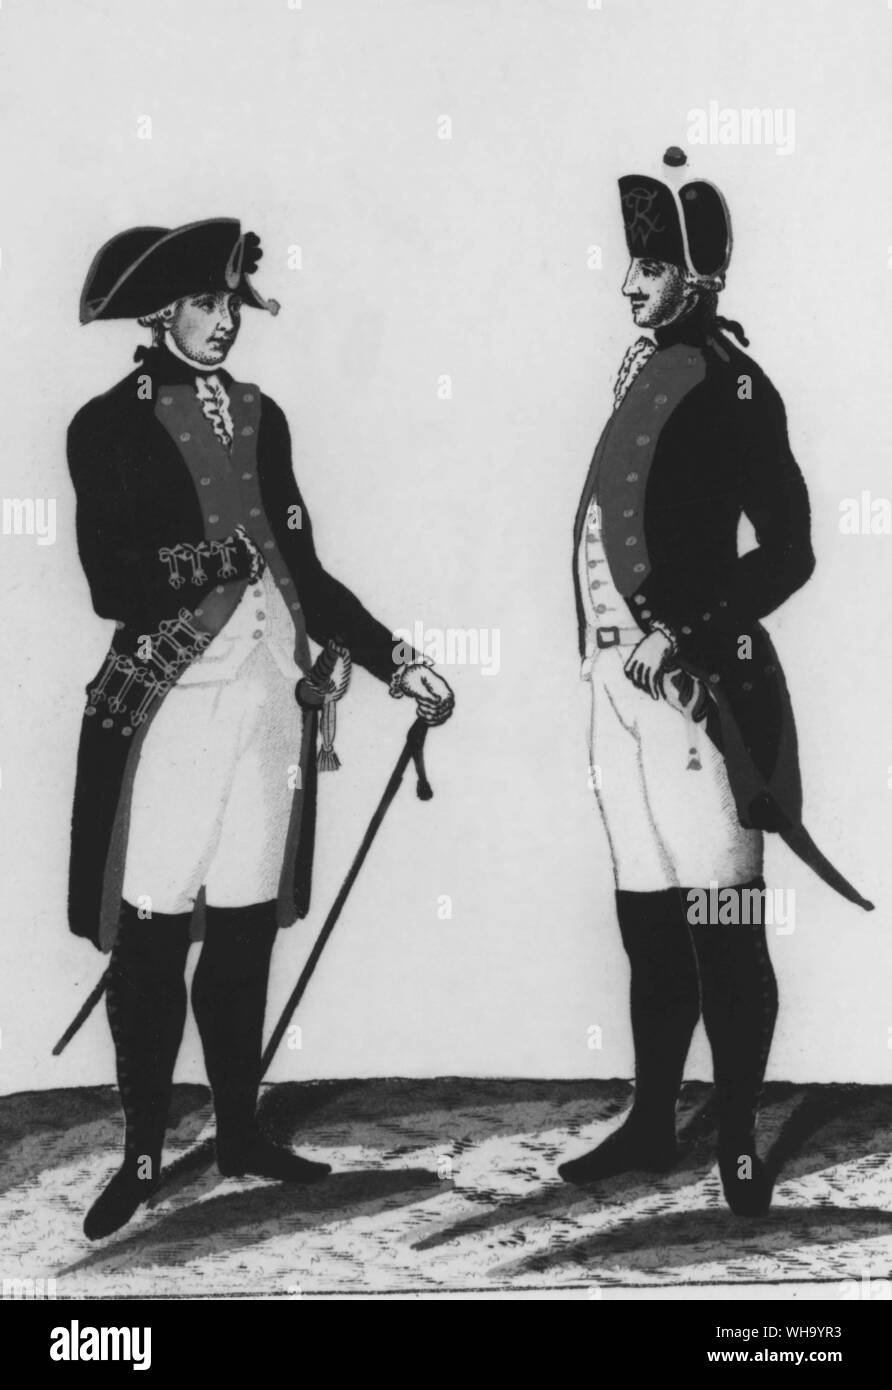 Hussars in Prussian military uniform, 1789. Stock Photo